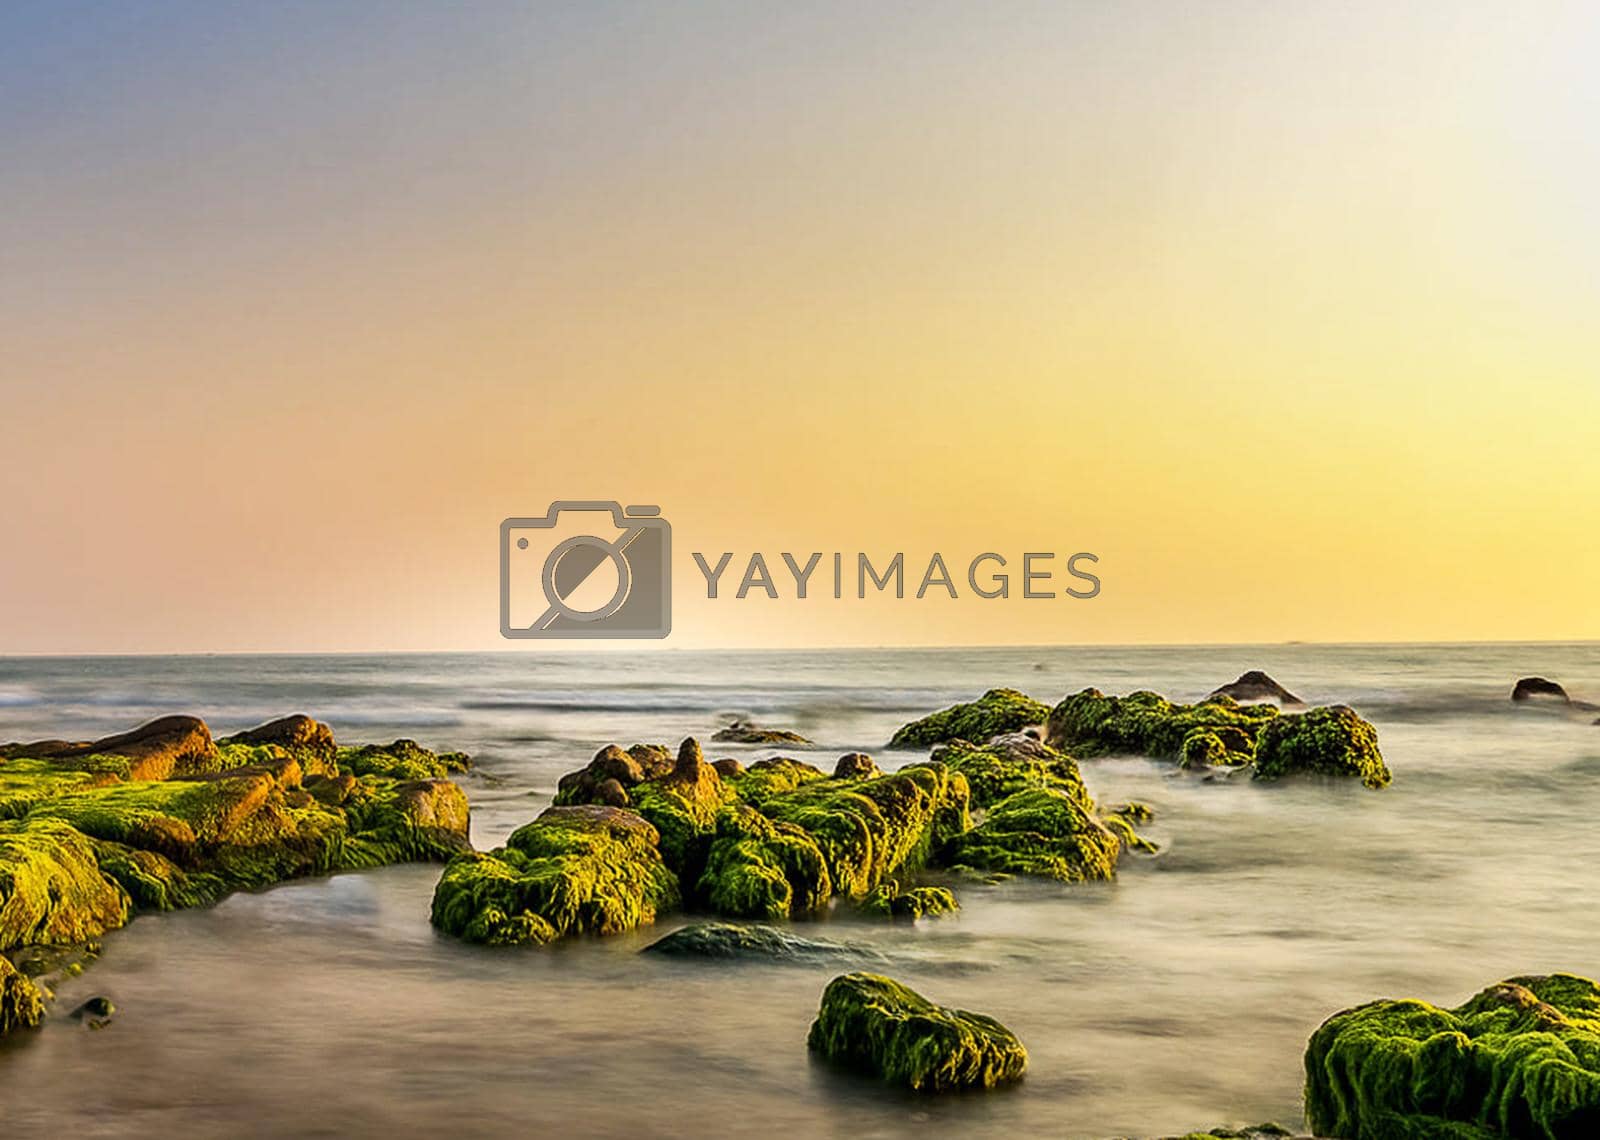 Royalty free image of Beautiful pictures of Vietnam by TravelSync27